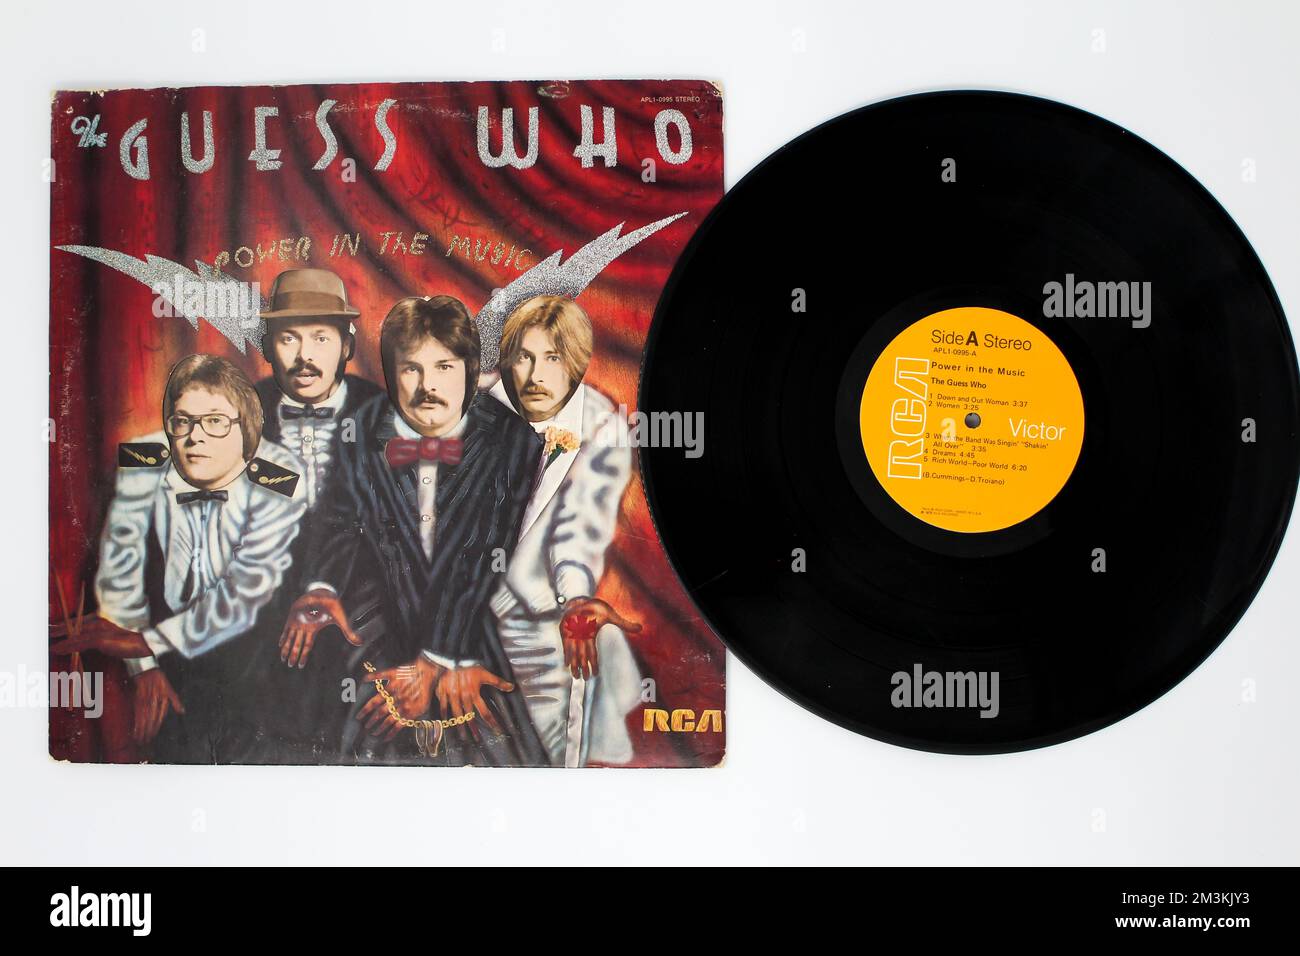 Psychedelic rock and hard rock band, The Guess Who music album on vinyl record LP disc. Titled: Power in the Music album cover. Stock Photo